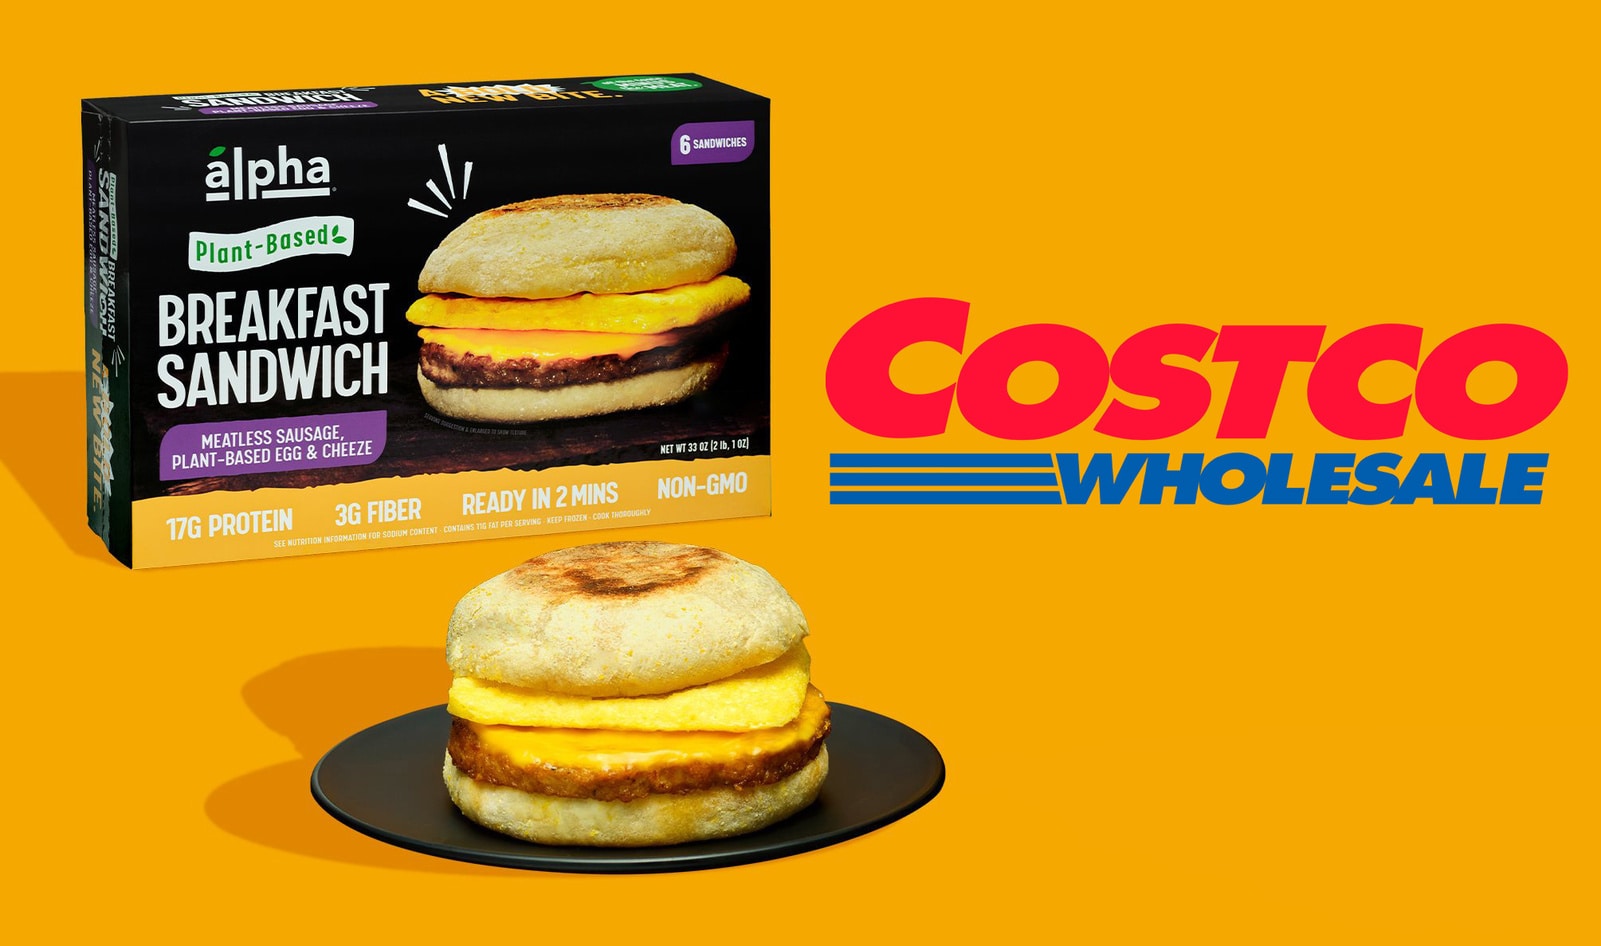 Vegan Breakfast Sandwiches Just Launched at Costco&nbsp;